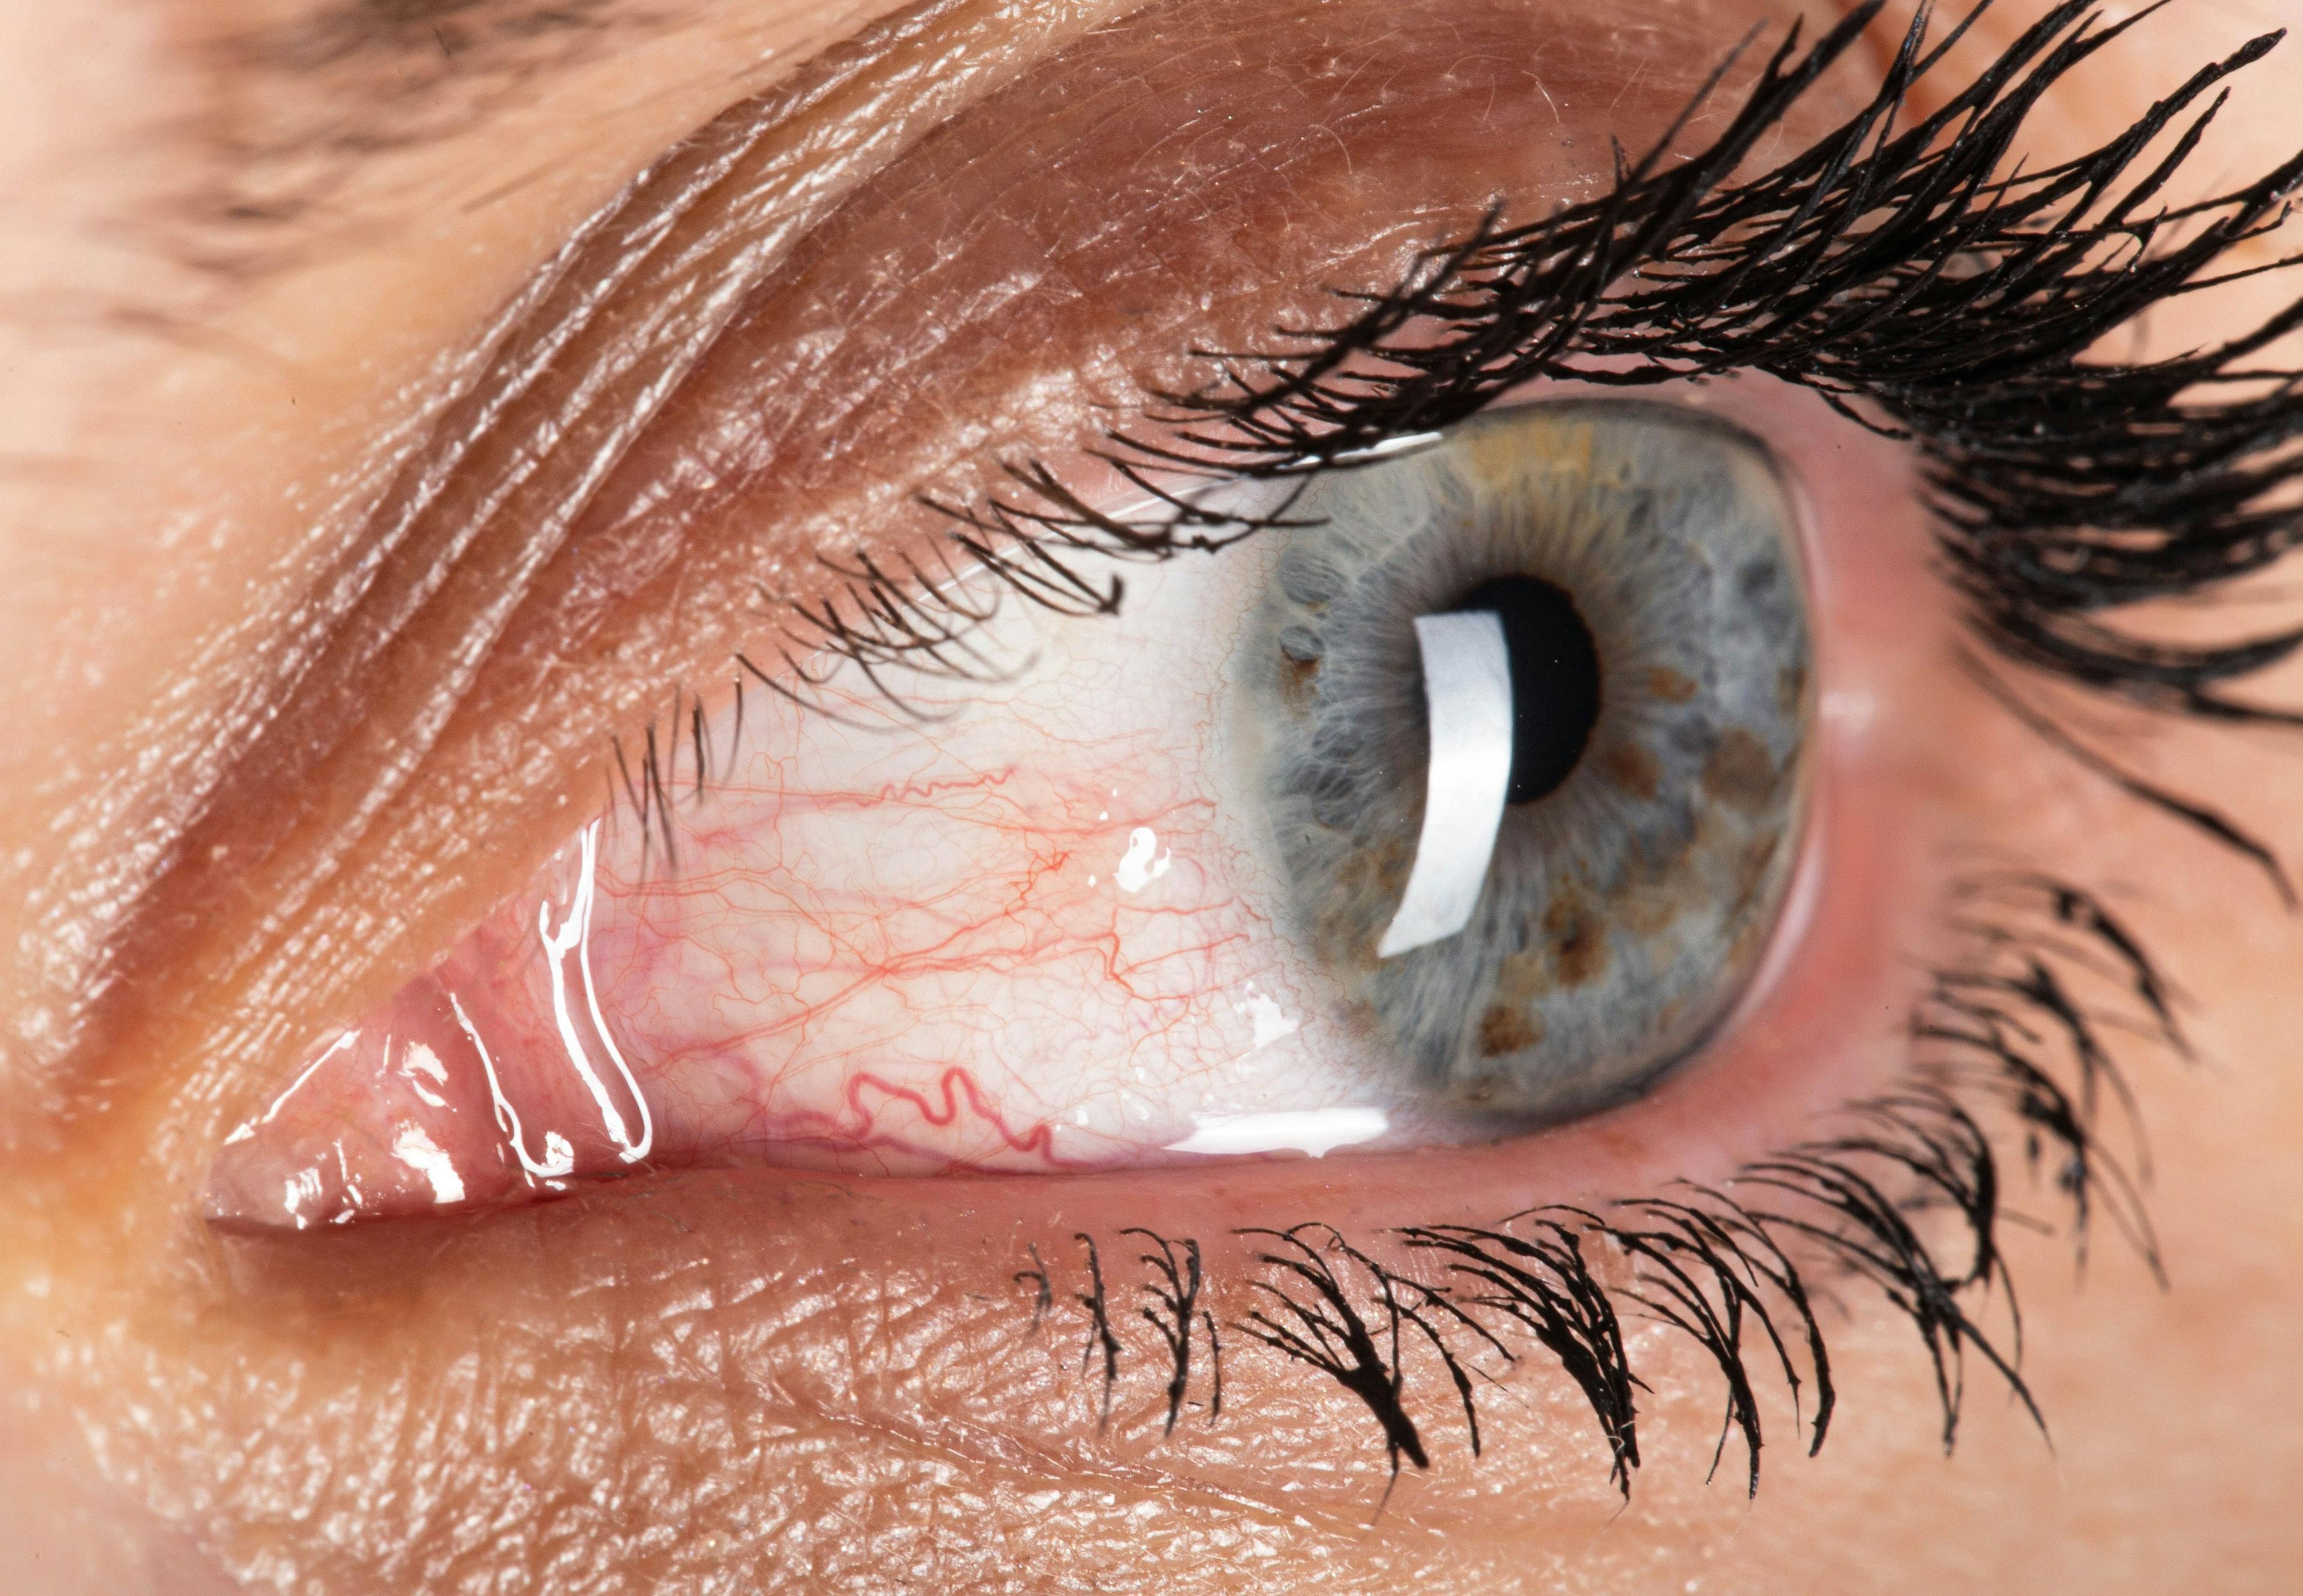 Brepocitinib Shows Positive Results For Treatment of Non-Infectious Uveitis in Phase 2 Study 